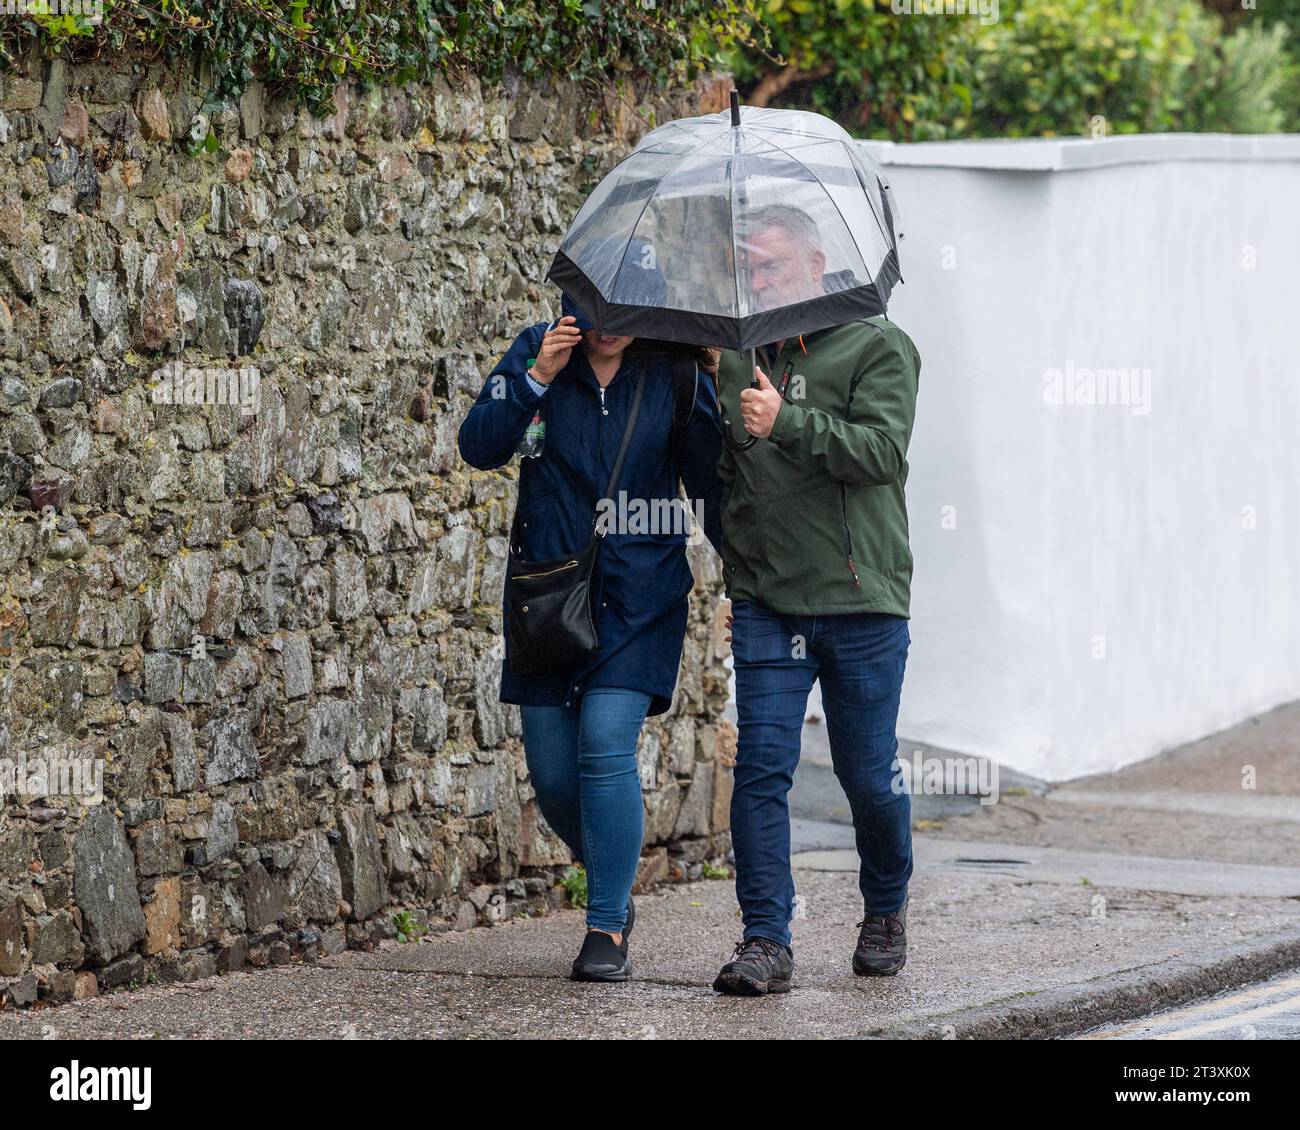 People struggling against high winds and heavy rain under a Met Éireann Weather Warning in Tramore, Co. Waterford, Ireland. Stock Photo